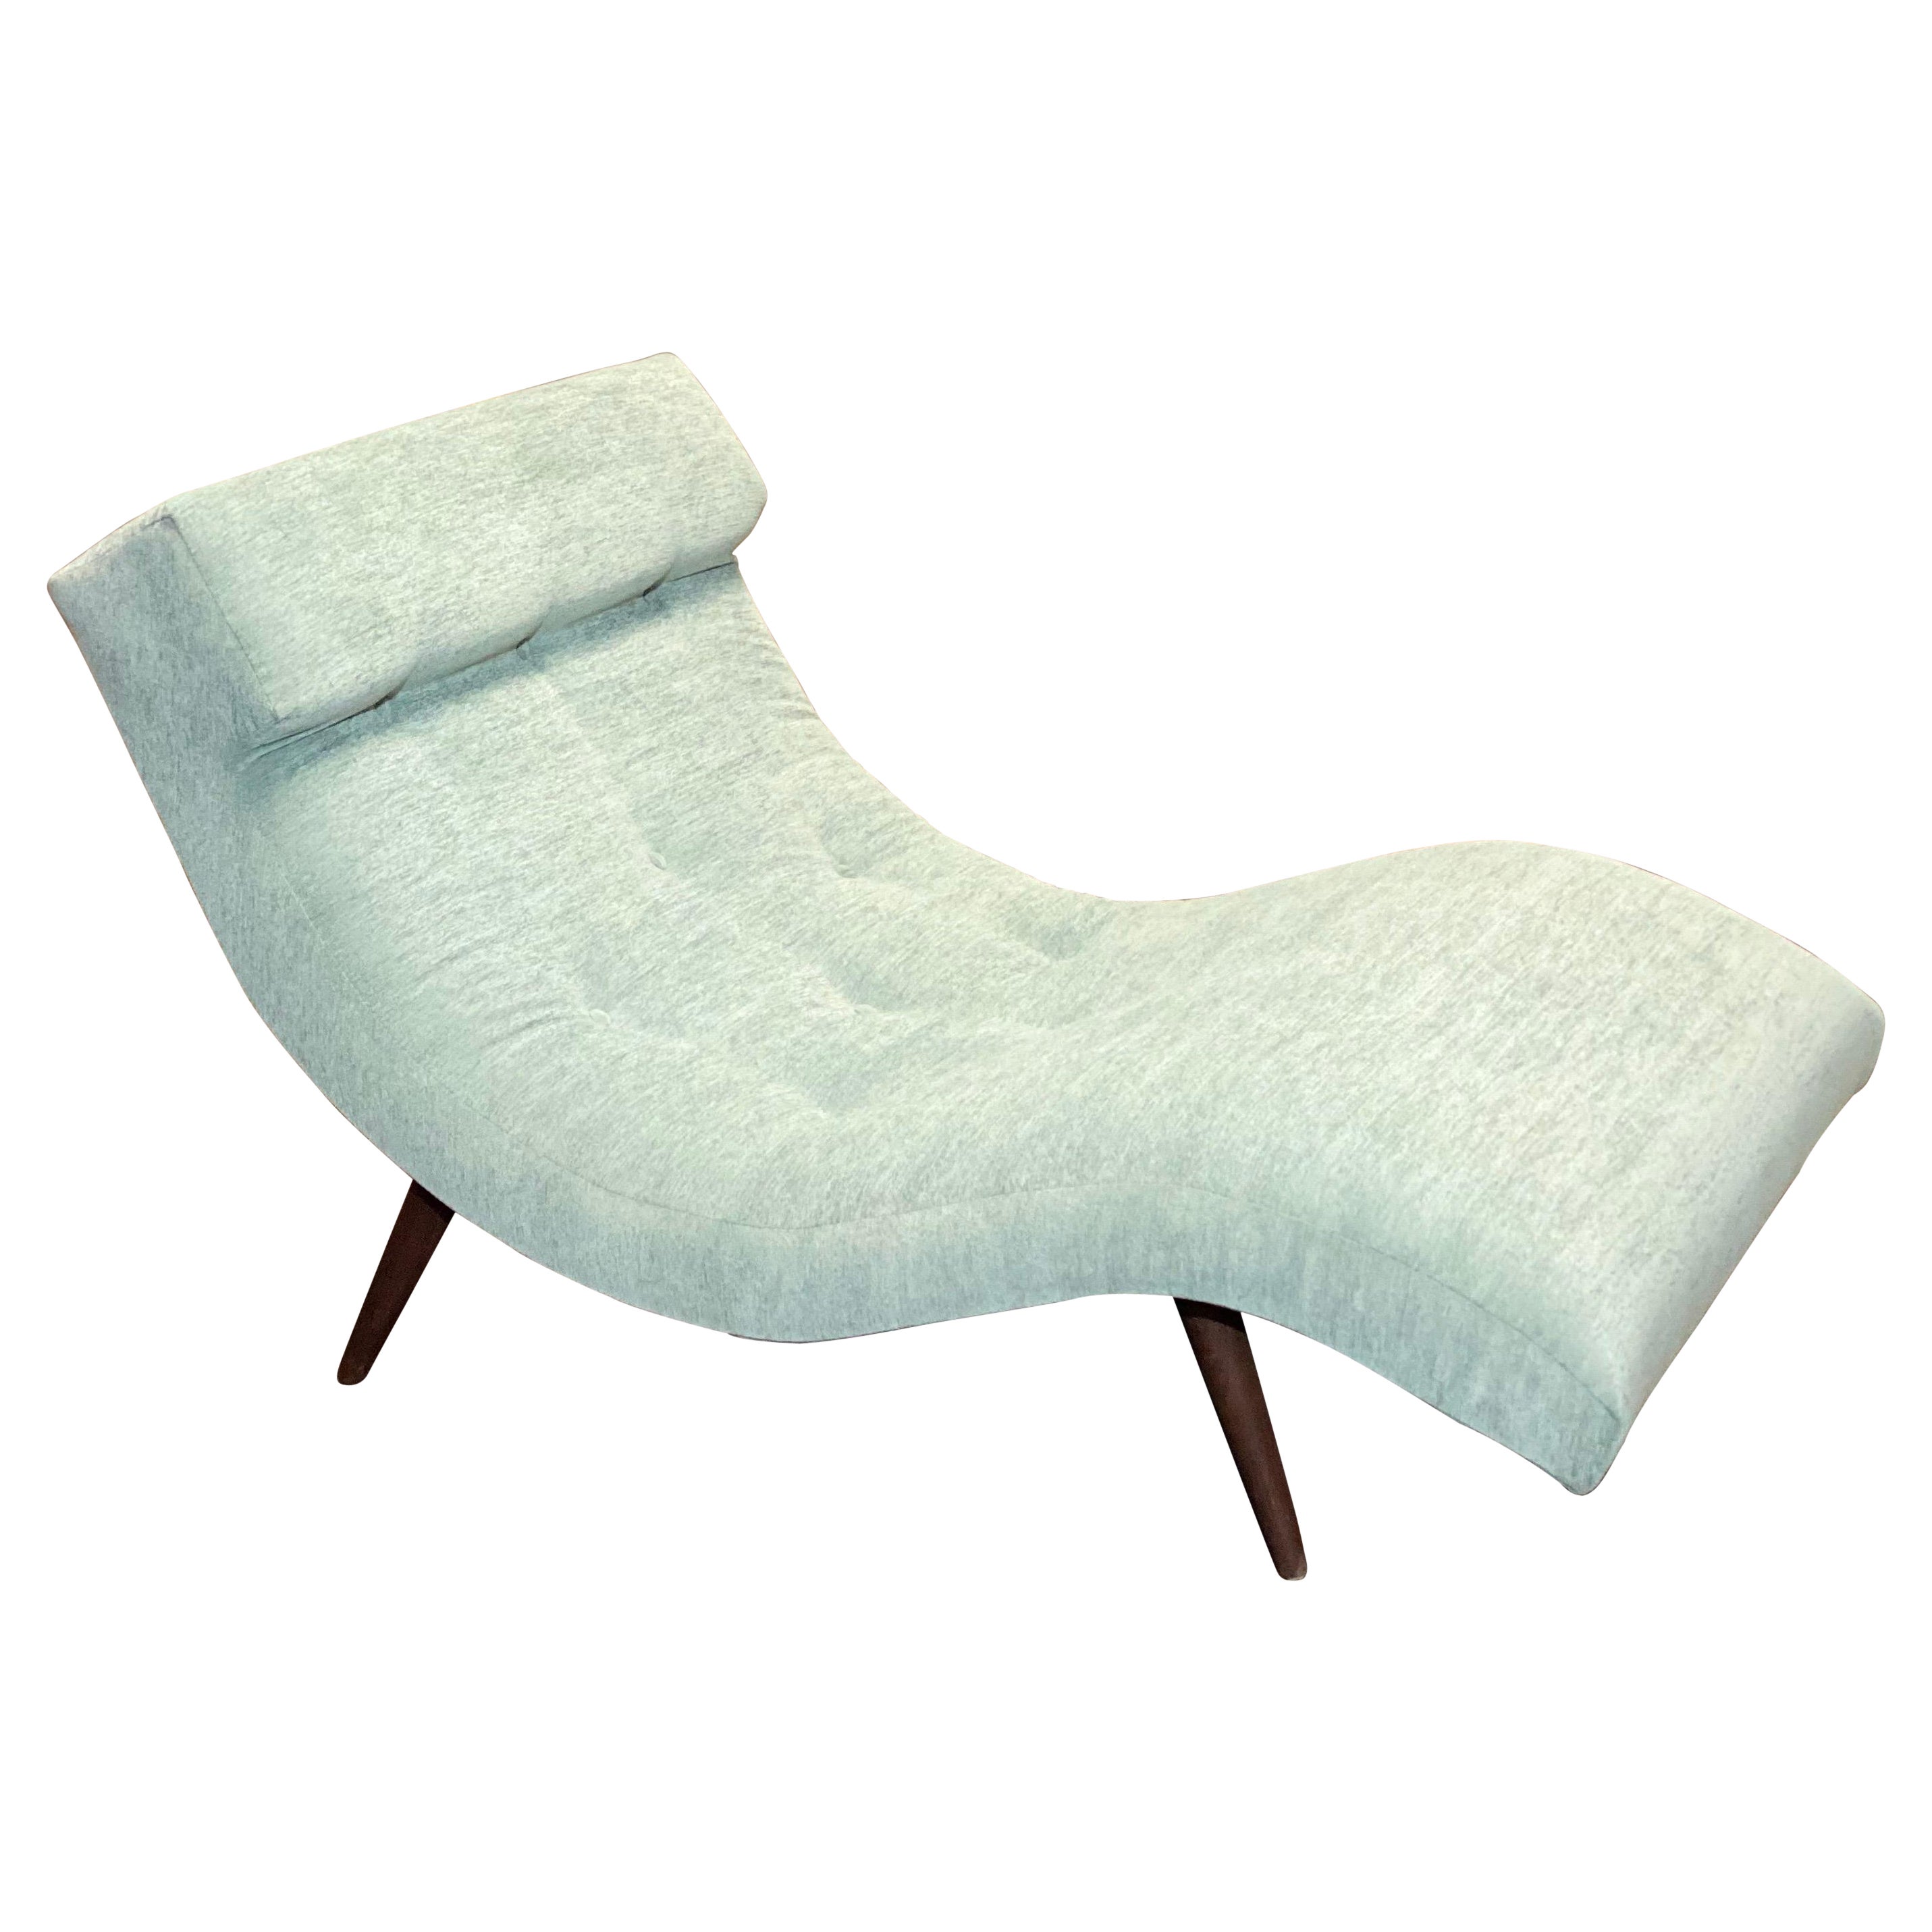 1960s Adrian Pearsall for Craft Associates Scoop Wave Sage Chaise